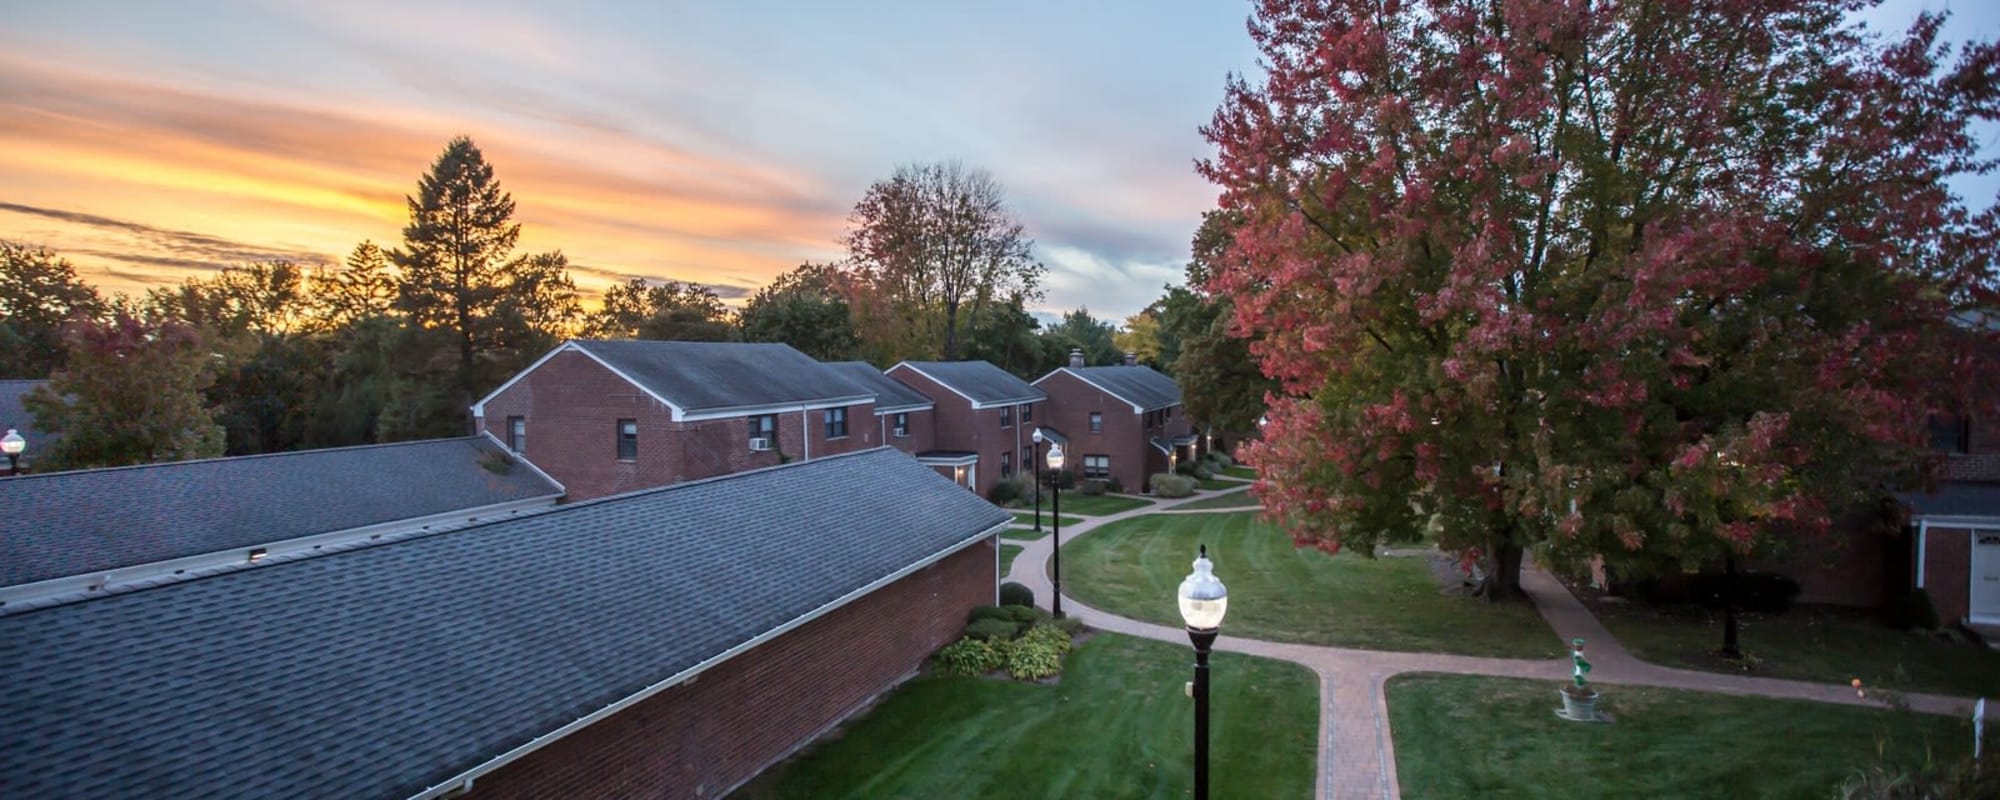 Apartments at Englewood Village in Englewood, New Jersey